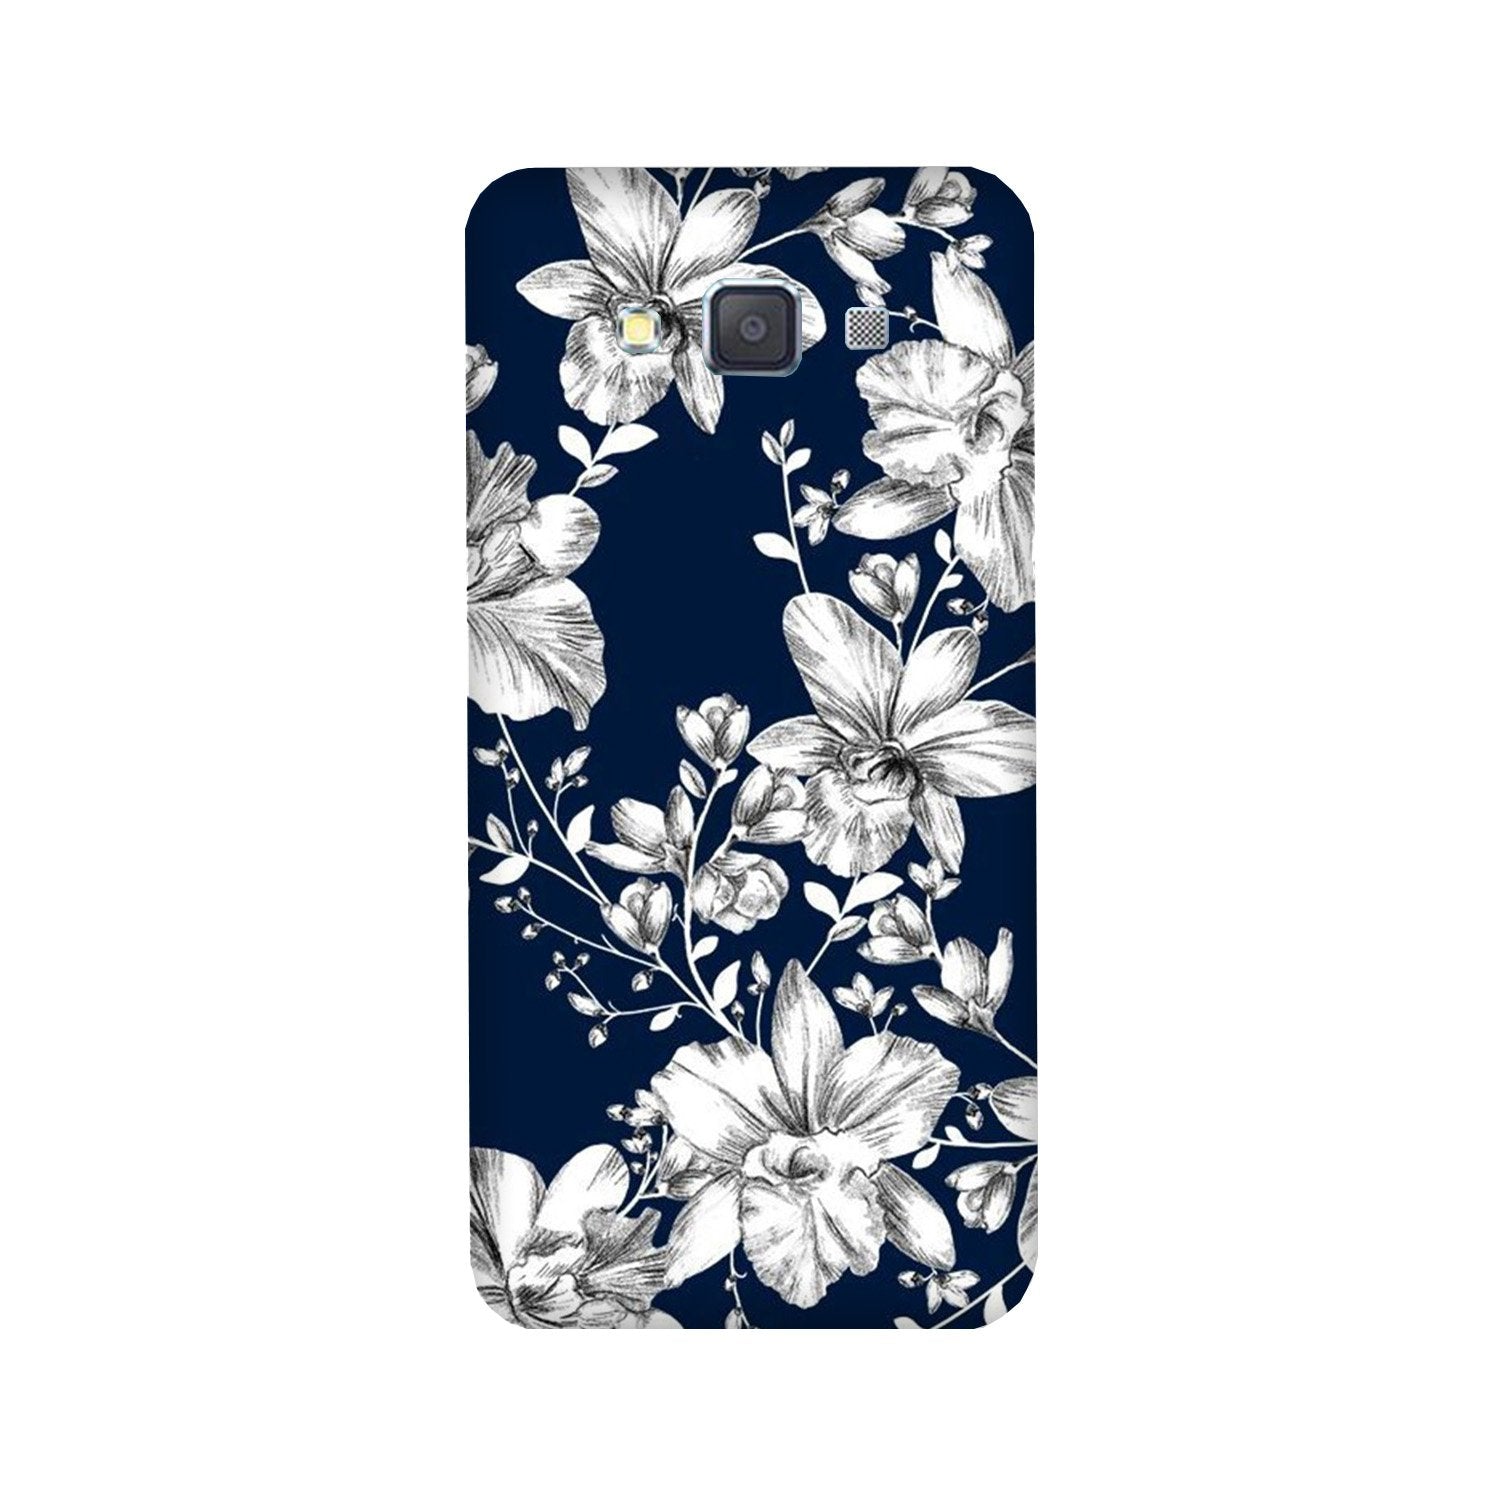 White flowers Blue Background Case for Galaxy Grand 2